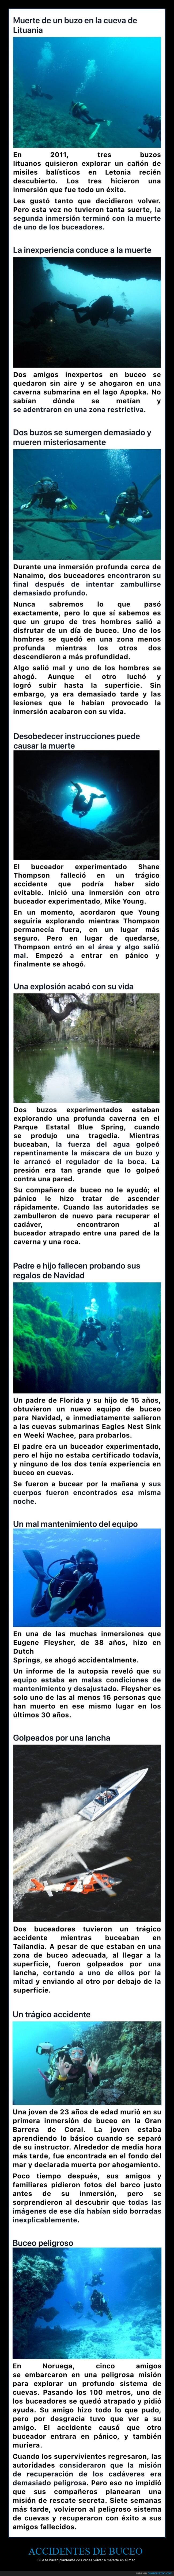 buceo,accidentes